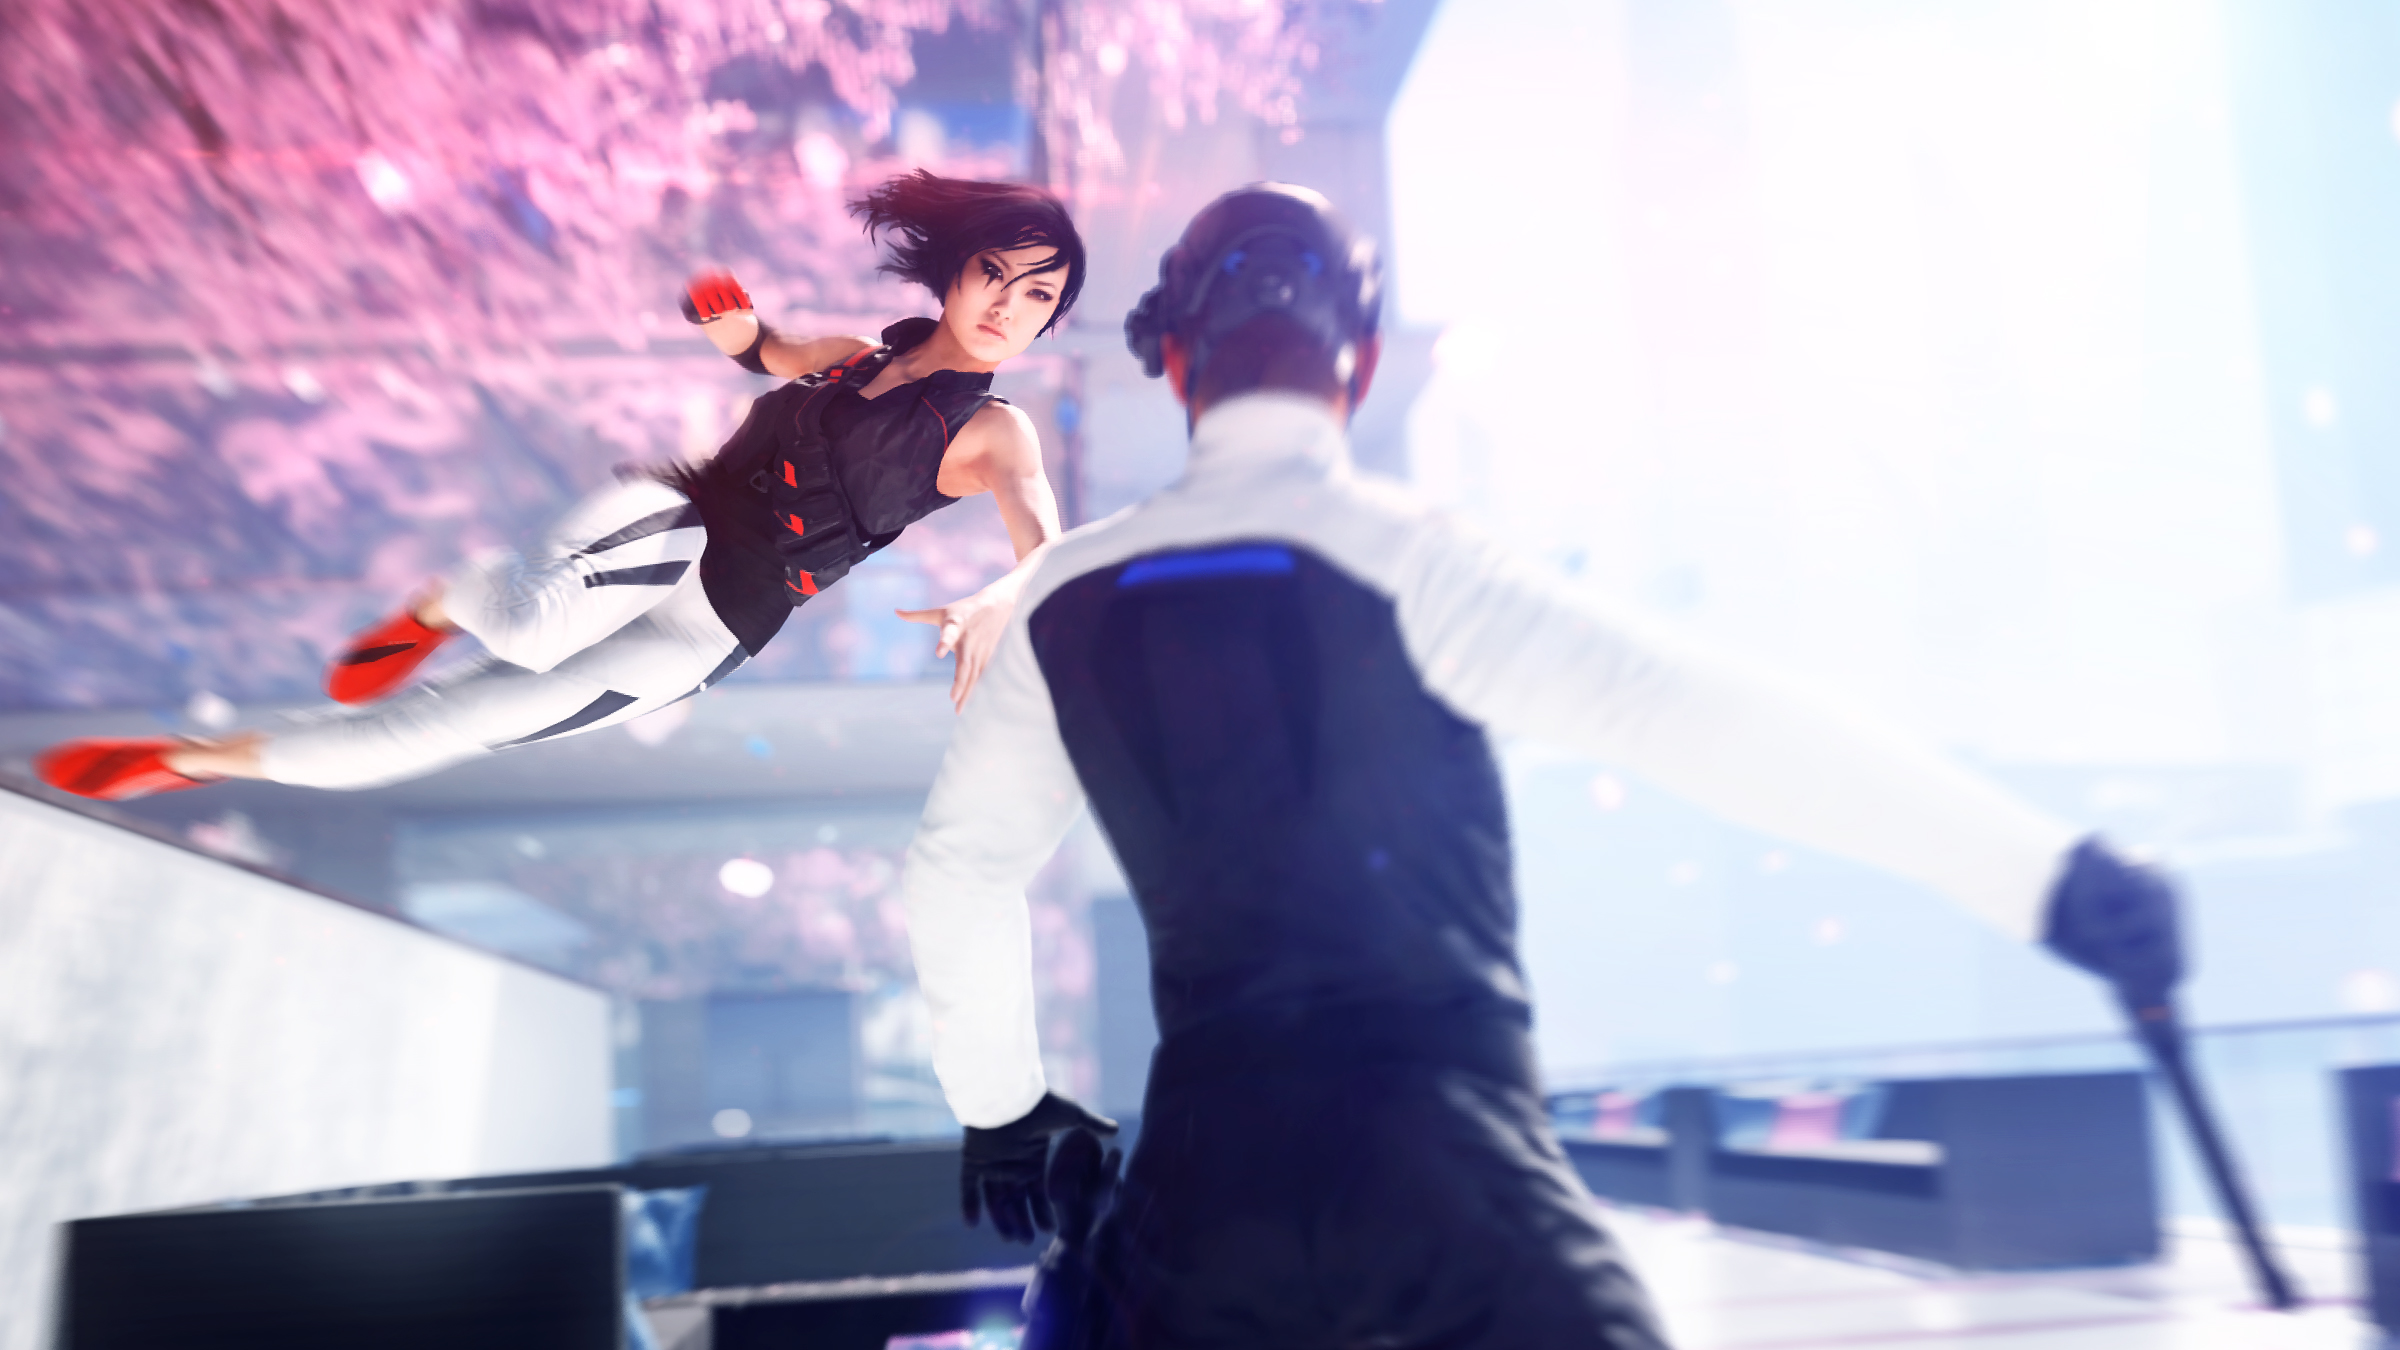 Mirror's Edge Catalyst  With Mirror’s Edge Catalyst we set out to create a universe that felt recognizable but different, futuristic yet believable, an oppressed society that almost could be ours. With its pristine and minimalistic aesthetics, the team created something that became unique, distinct and bold. Something you’d never seen before. 
                              
                              - Jhony Ljungstedt, Art Director, Mirror’s Edge Catalyst